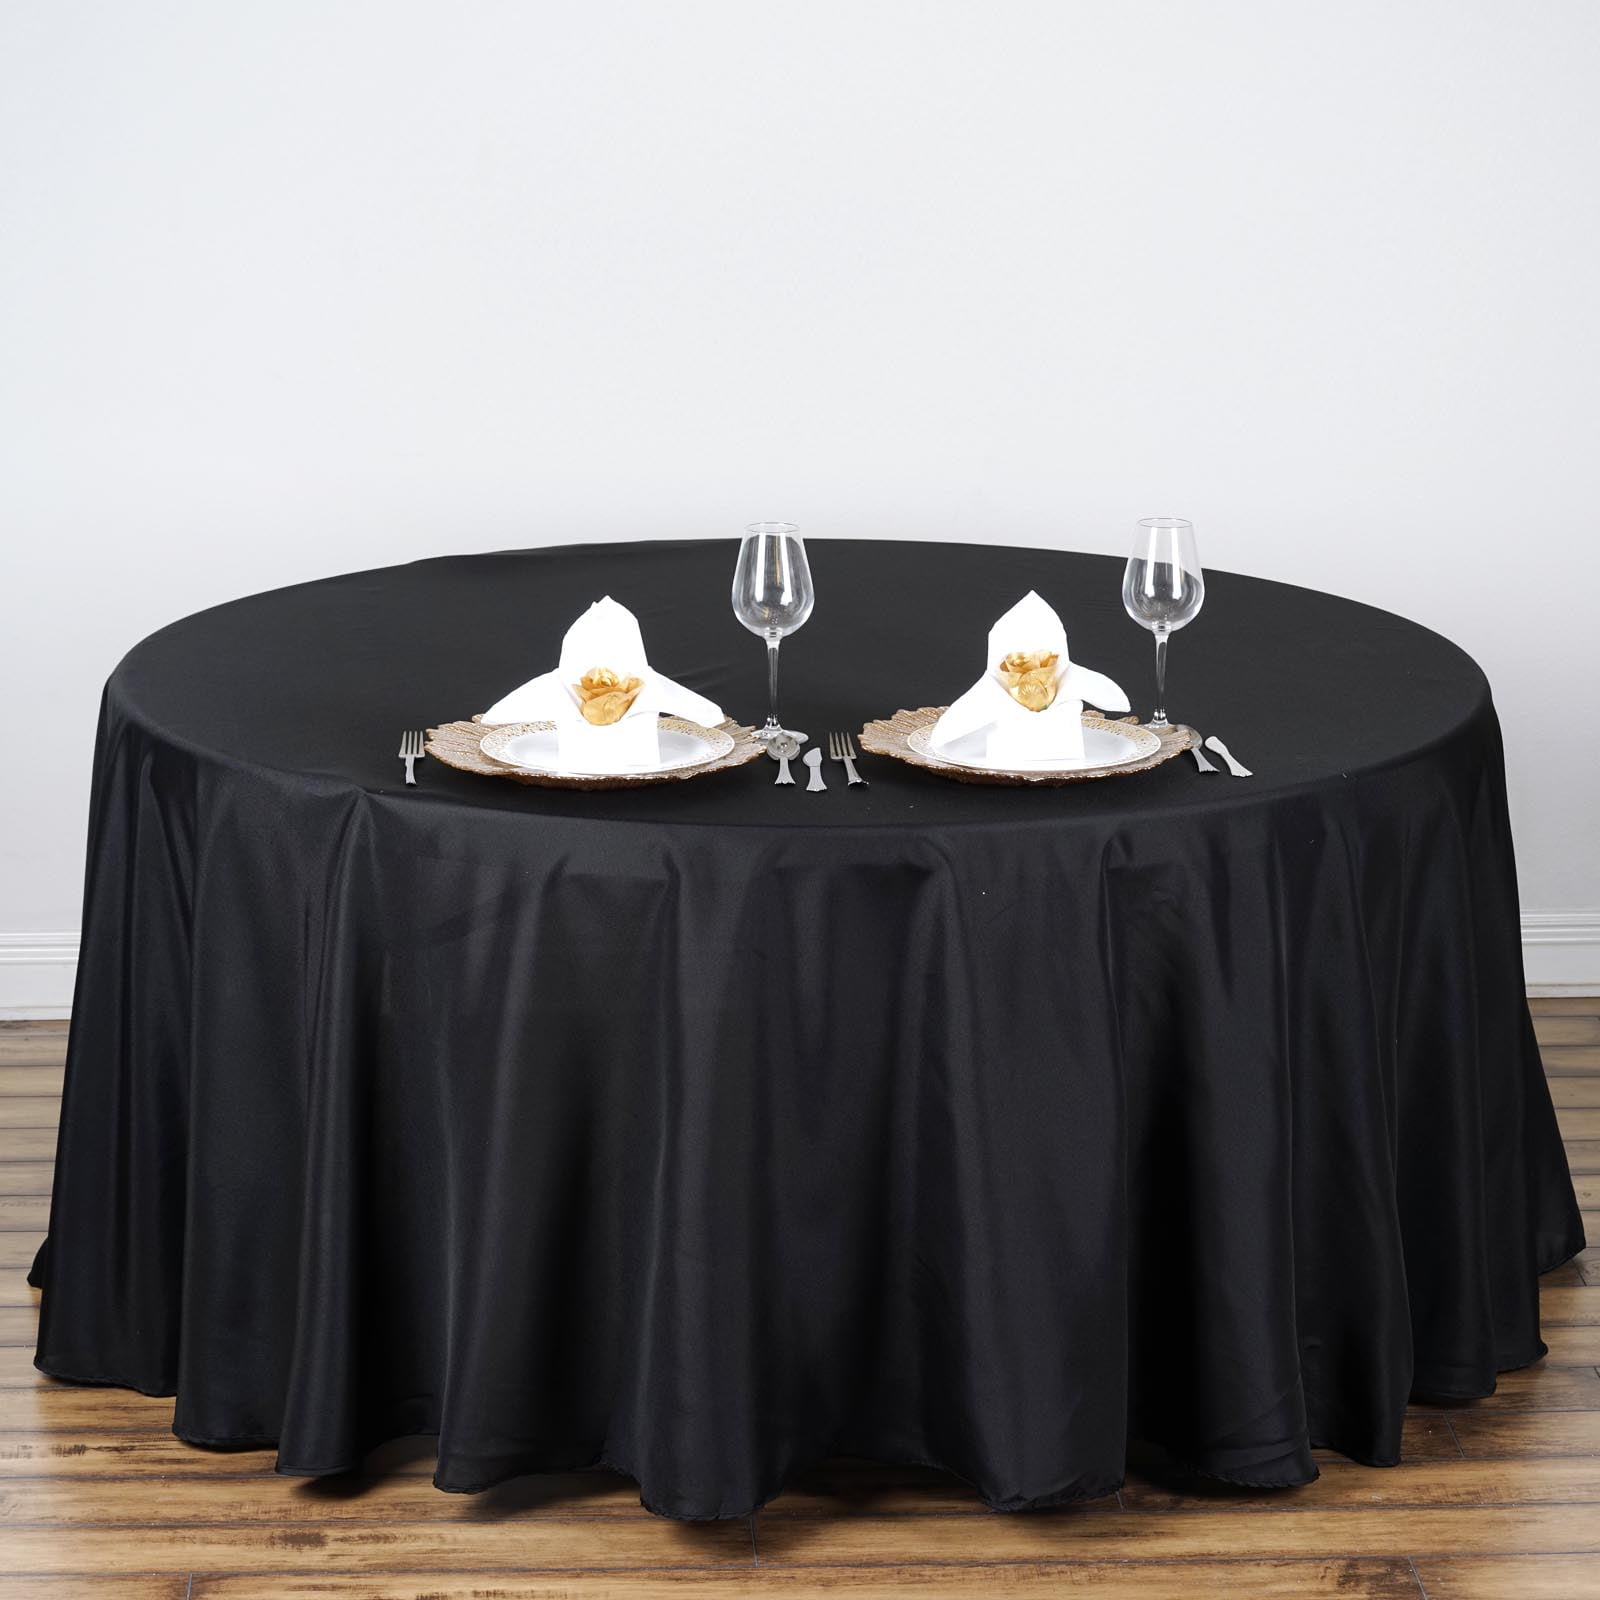 5 pack 108 inch Round Wedding Polyester table cover wedding table Cloth 